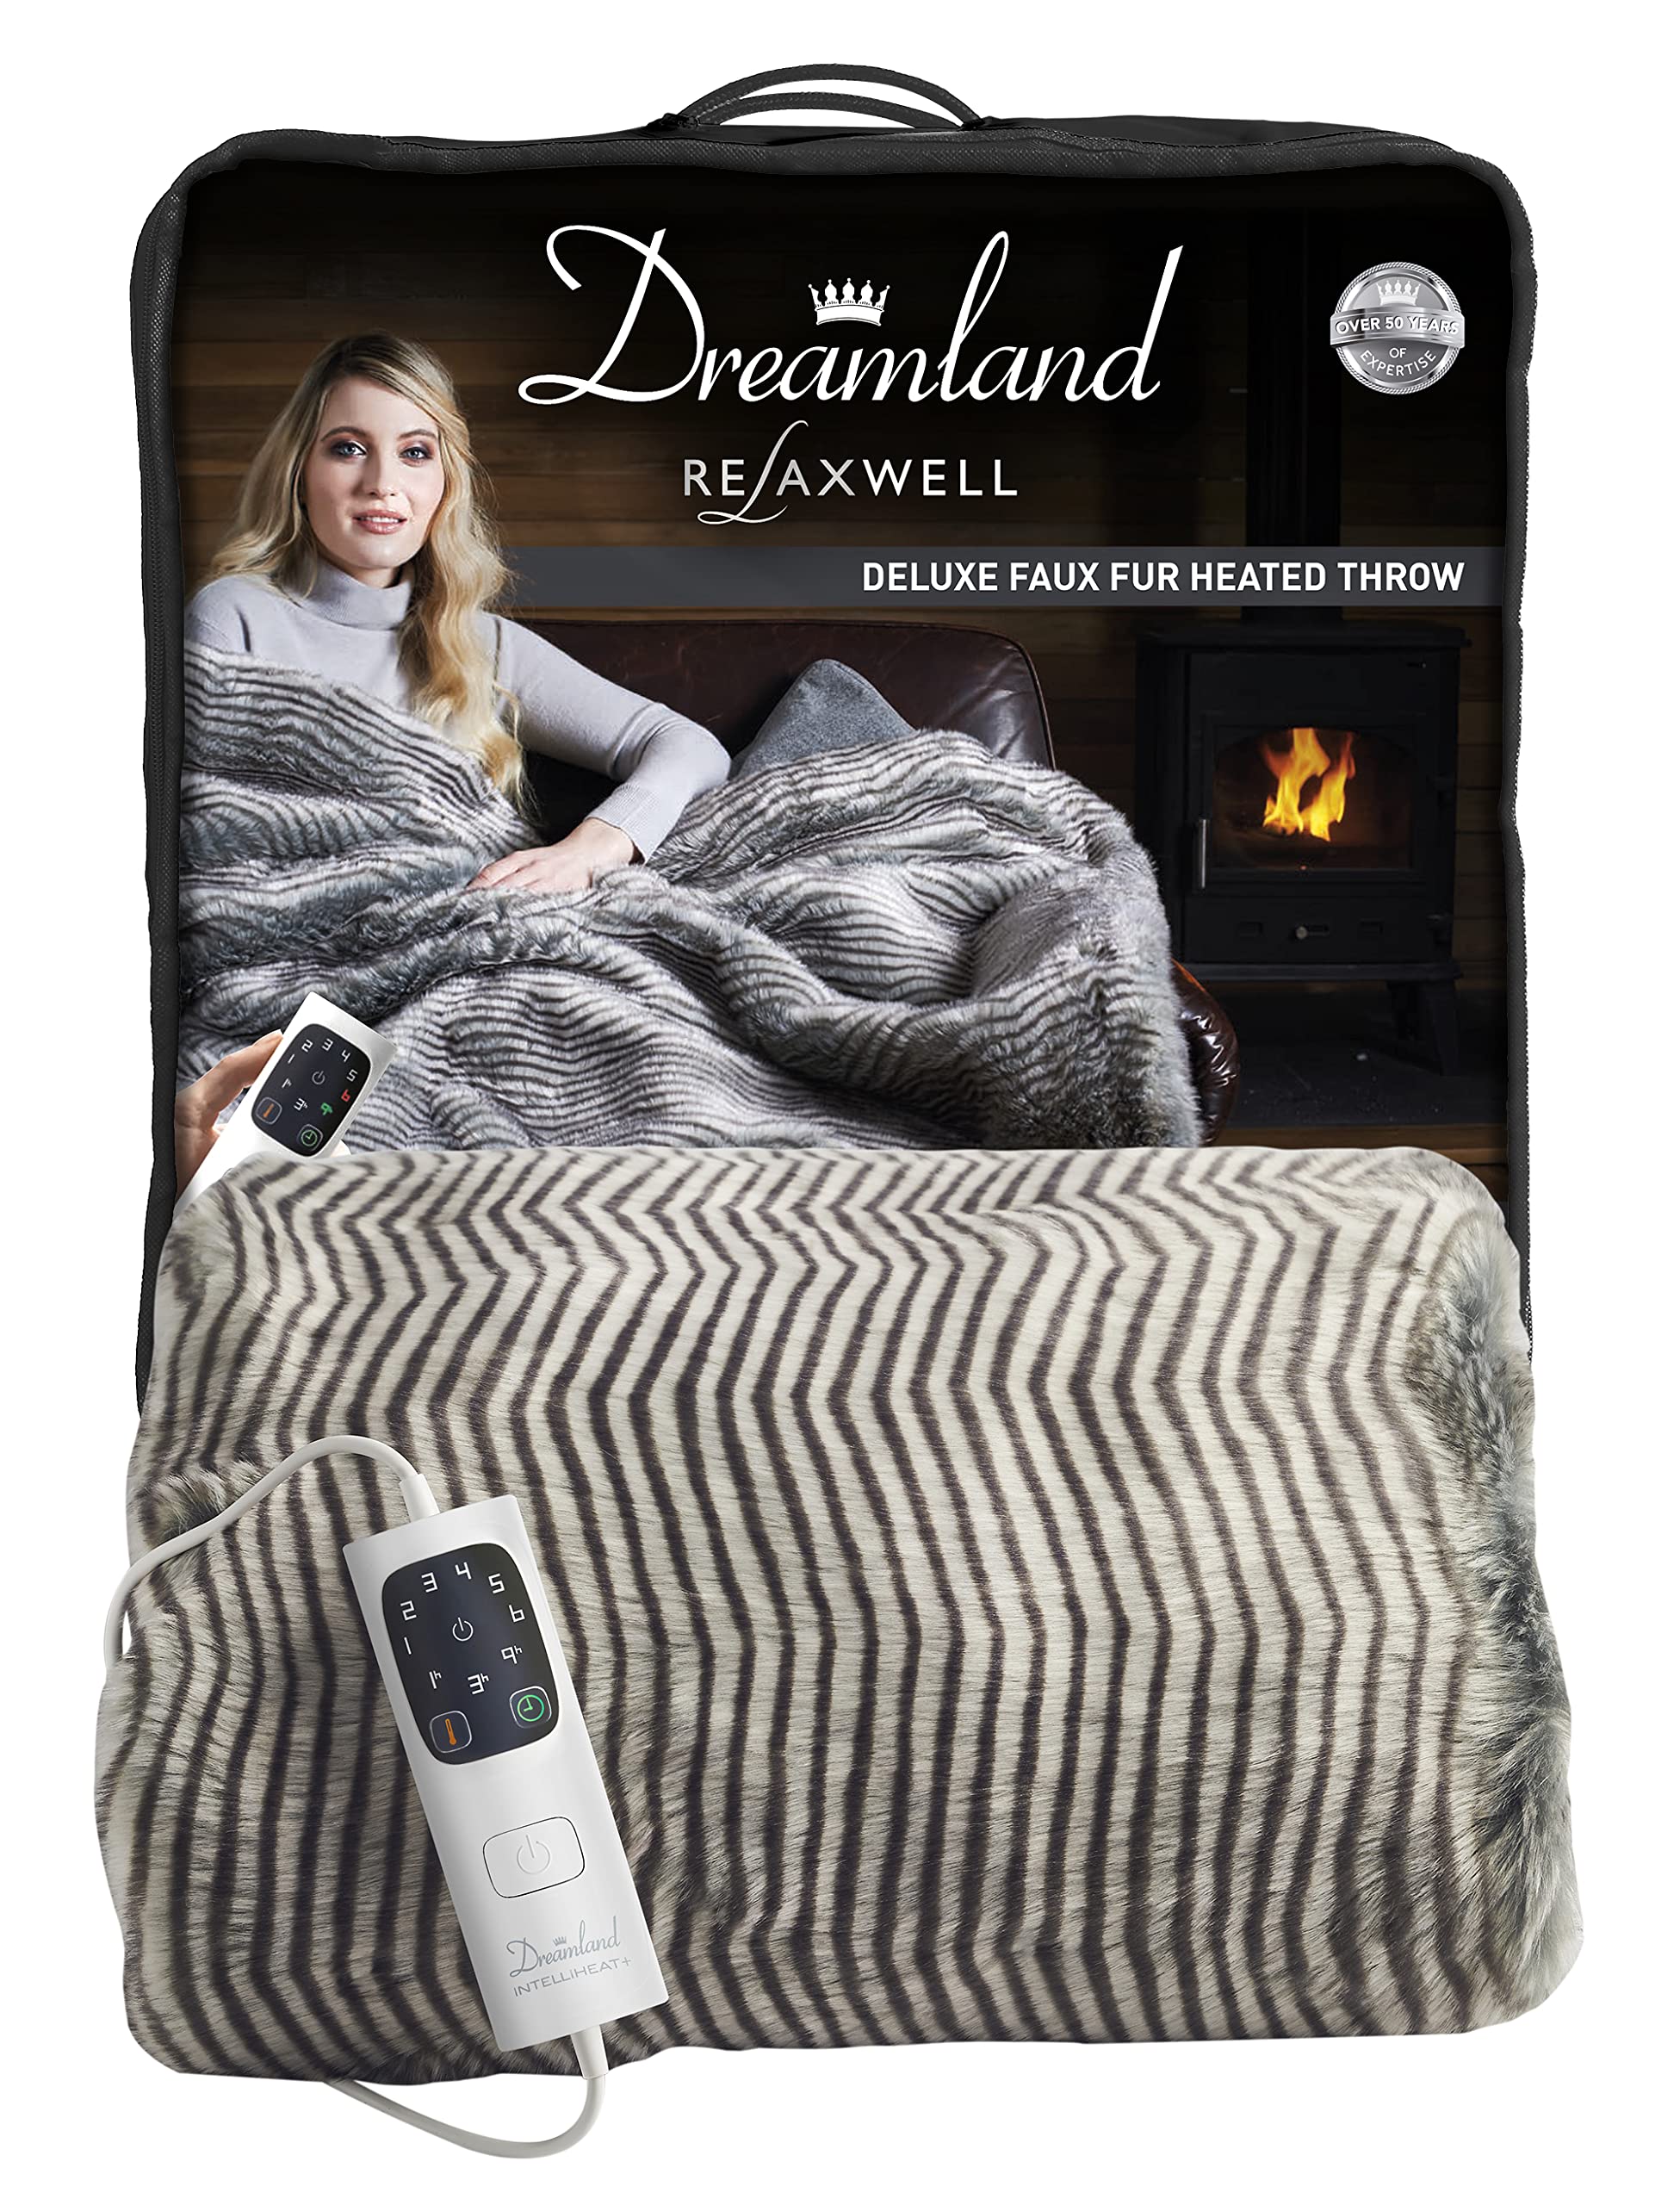 Dreamland Intelliheat Deluxe Zebra Heated Faux Fur Intelliheat+ 5 Minute Fast Heat Electric Throw, 120x160 cm, 1 Control, 6 Temperature Settings, Timer, Machine Washable and Tumble Dry Safe